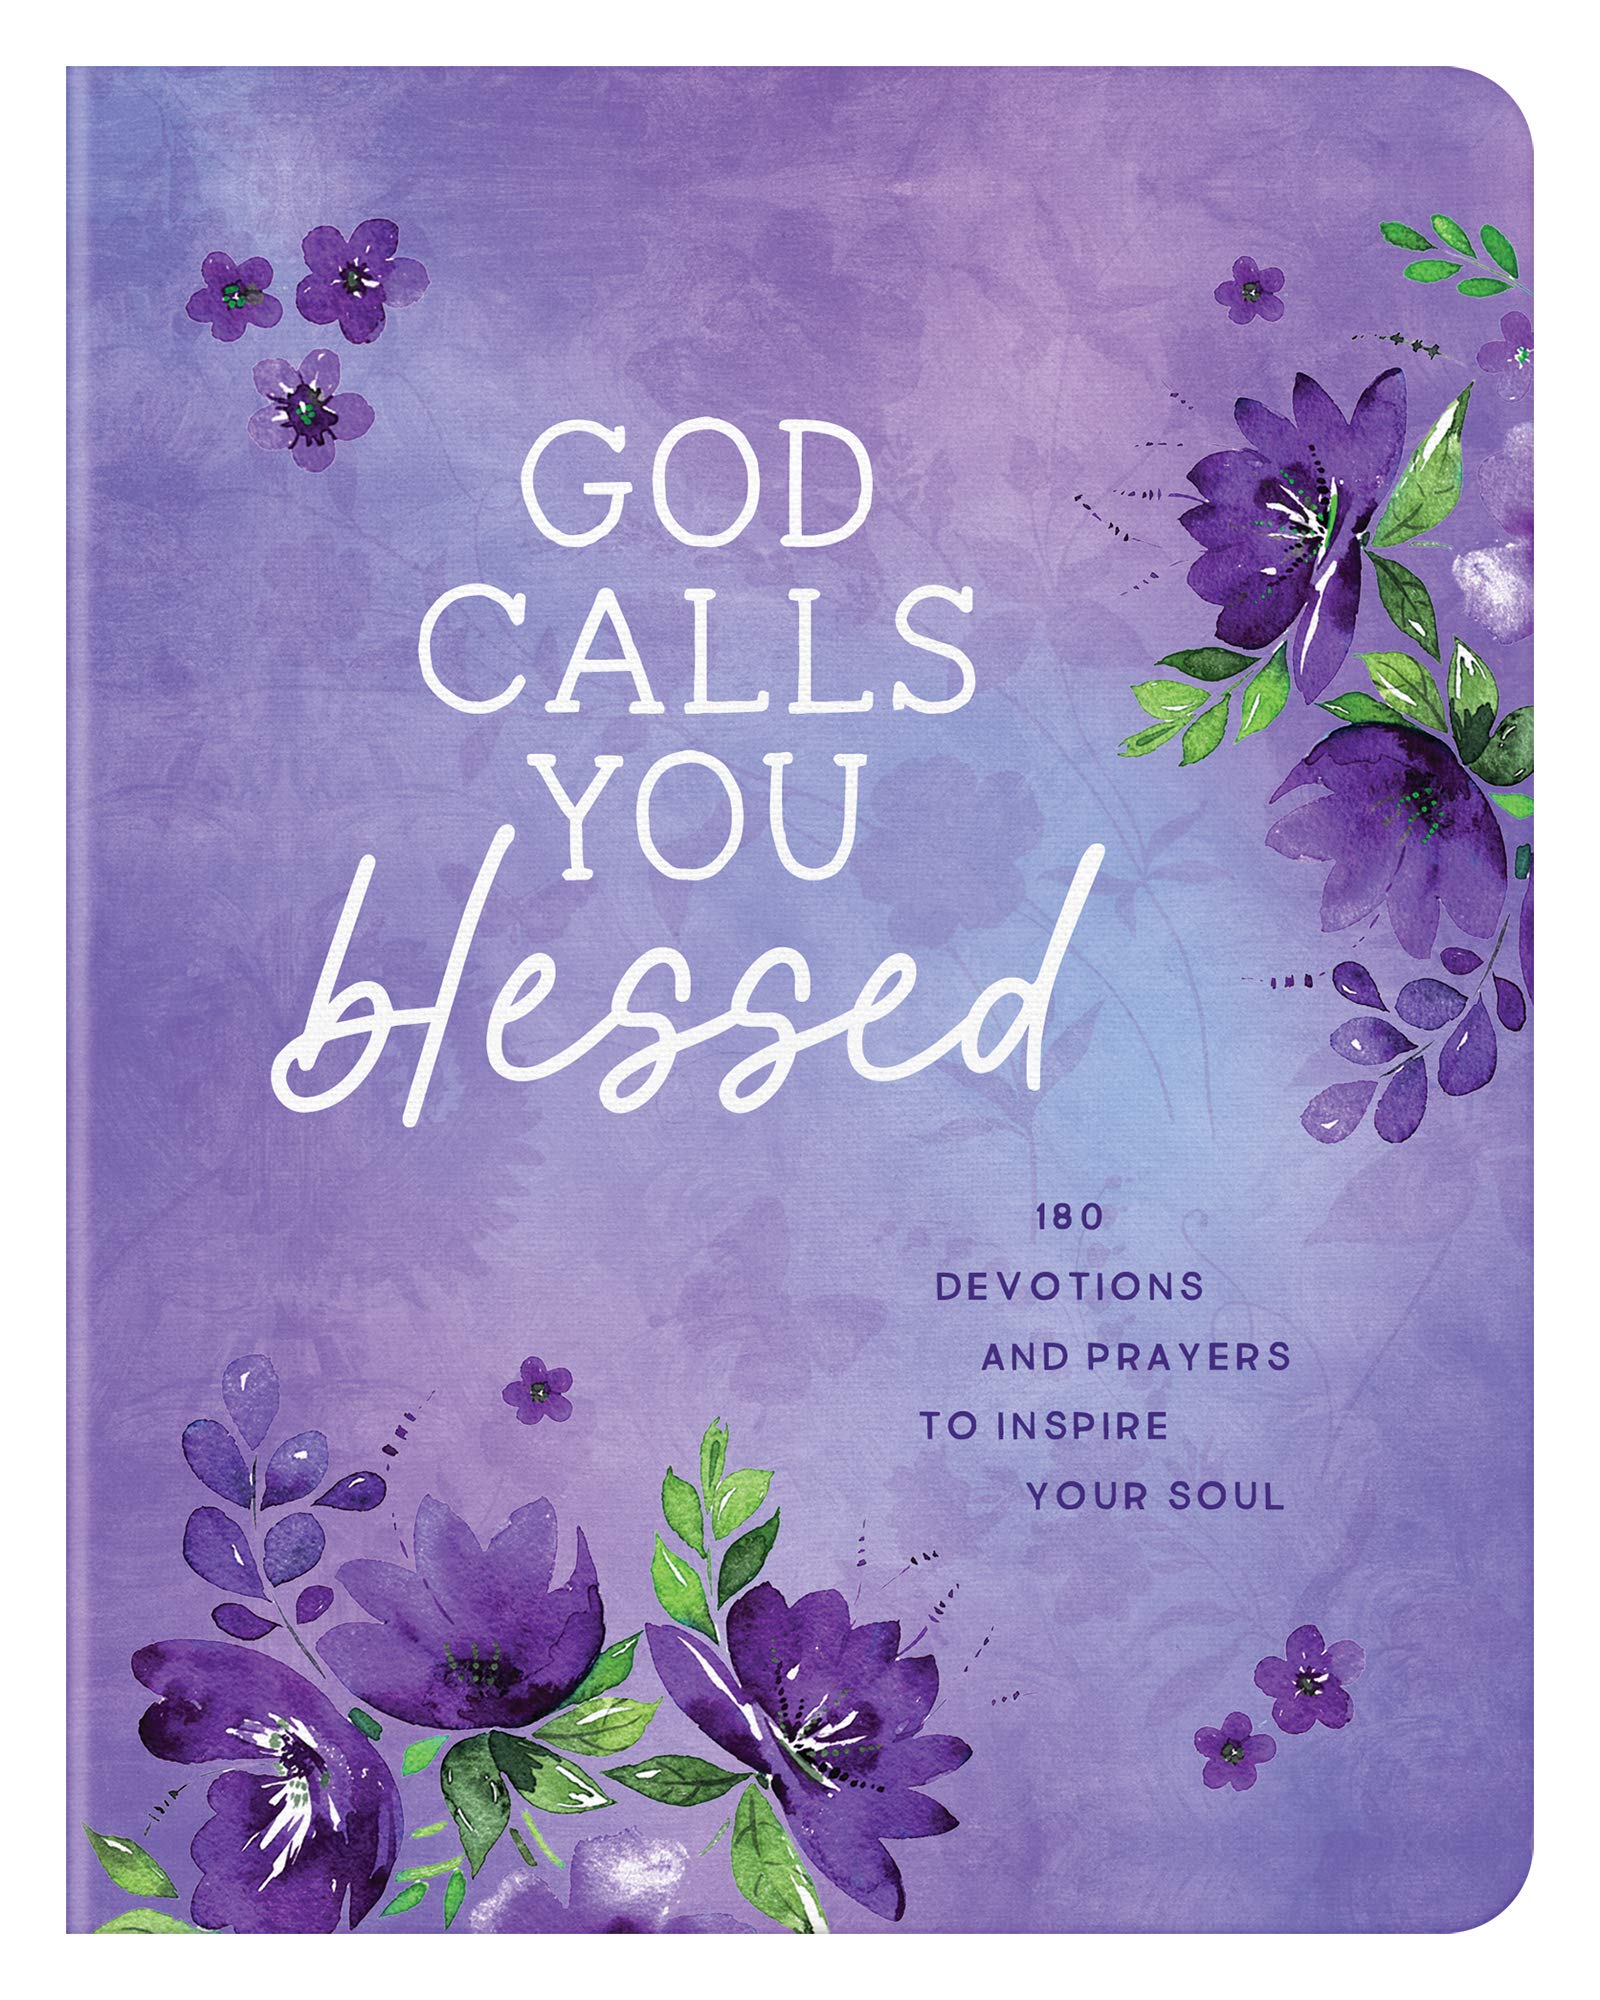 ROCKONLINE | God Calls You Blessed: 180 Devotions and Prayers to Inspire Your Soul | Barbour Publisher | New Creation Church | NCC | Joseph Prince | ROCK Bookshop | ROCK Bookstore | Star Vista | Scriptures | Devotional | Free delivery for Singapore Orders above $50.